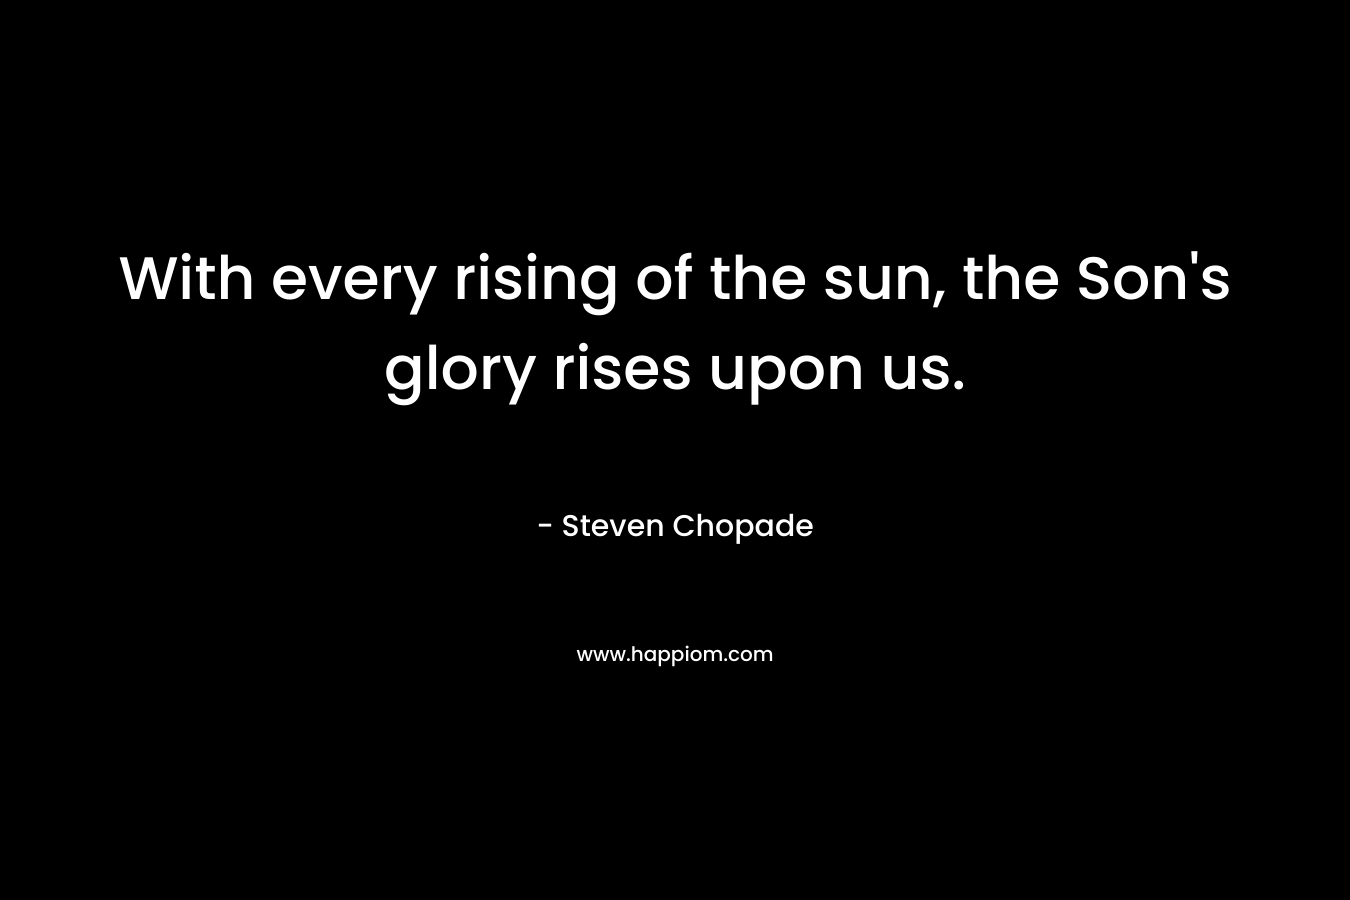 With every rising of the sun, the Son’s glory rises upon us. – Steven Chopade